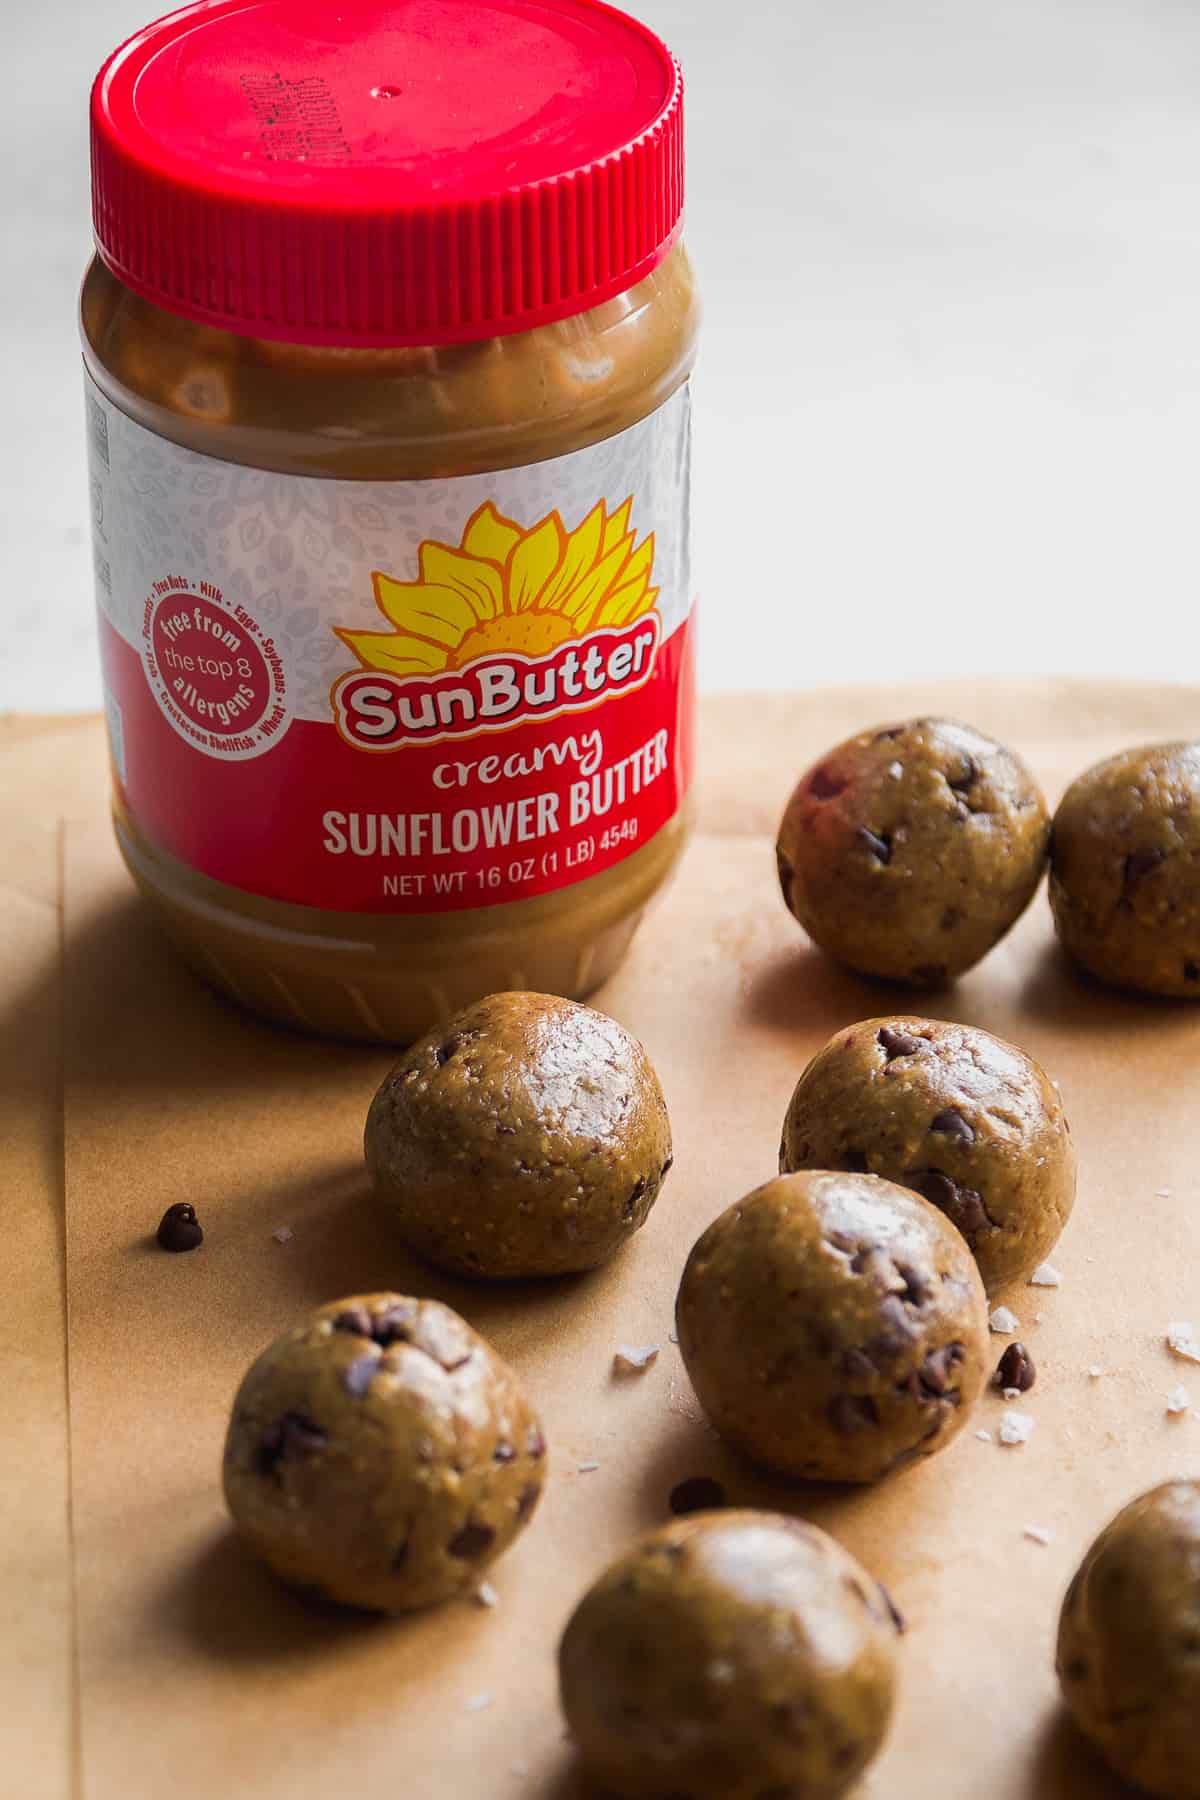 Cookie dough balls on parchment paper with a jar of sunflower butter with a red lid.